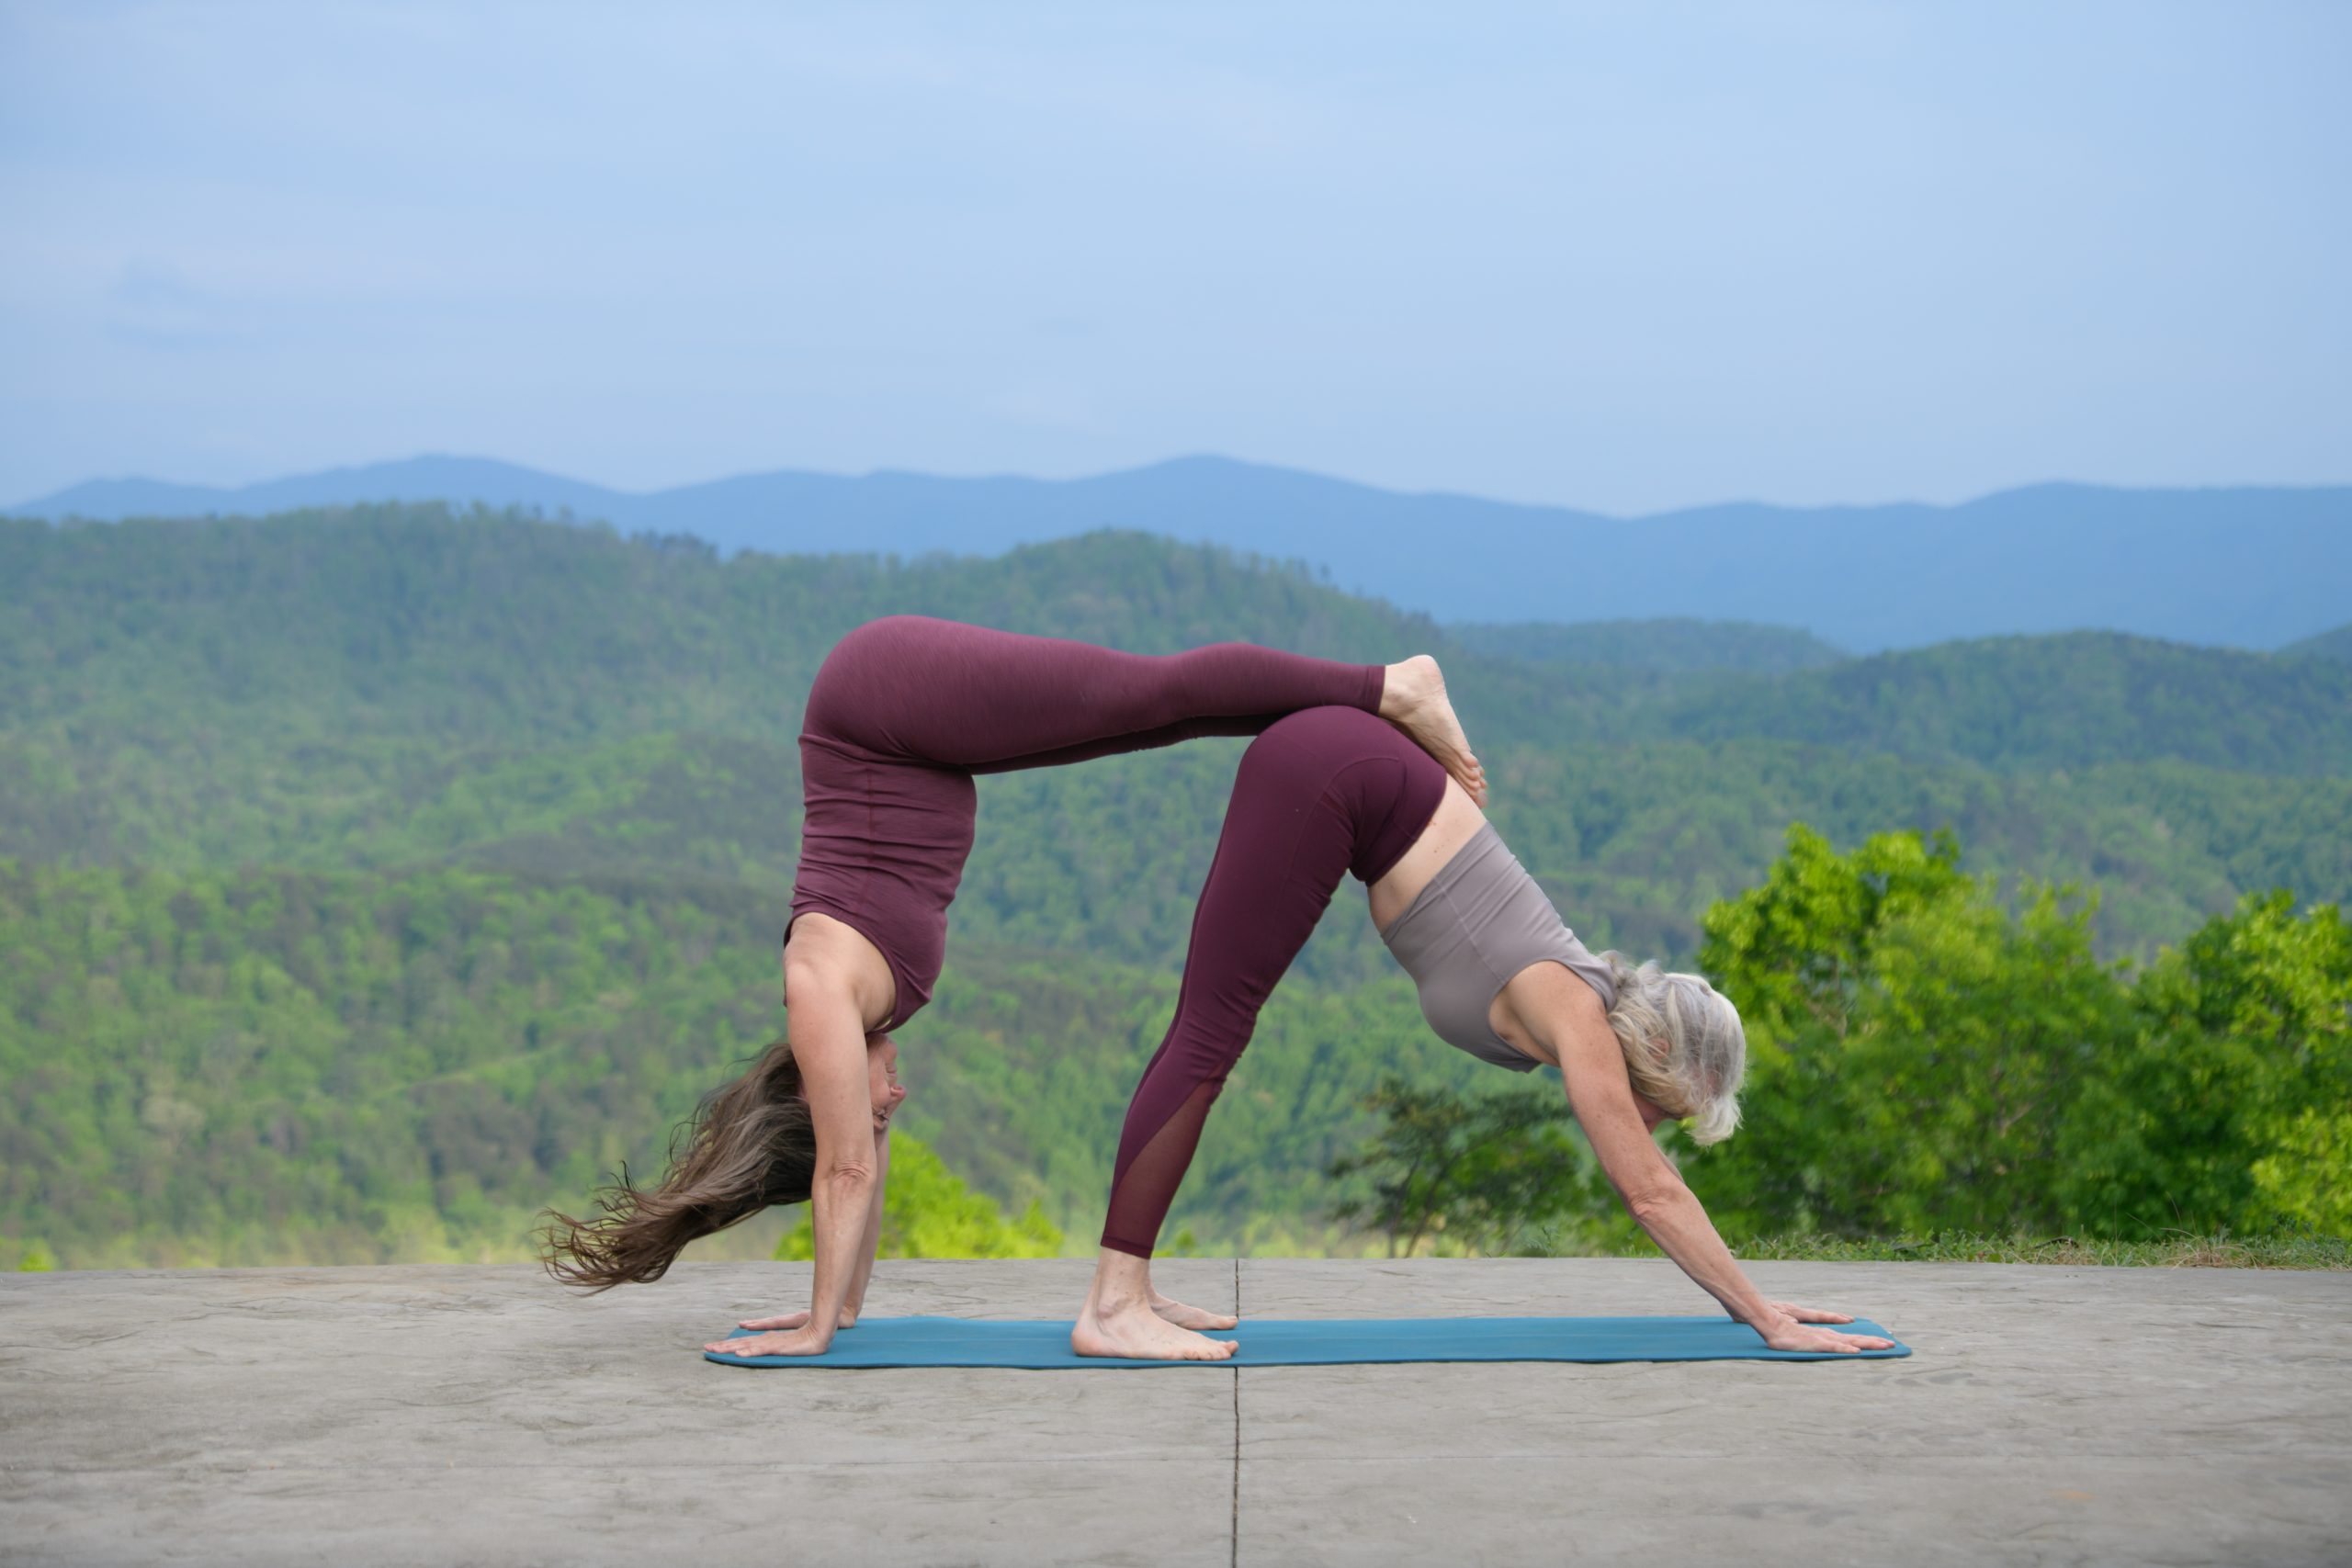 Yoga retreats for women, Hiking retreats for women, Recharge, Renew and Re-energize in Smoky Moutains, Cherokee National Forest